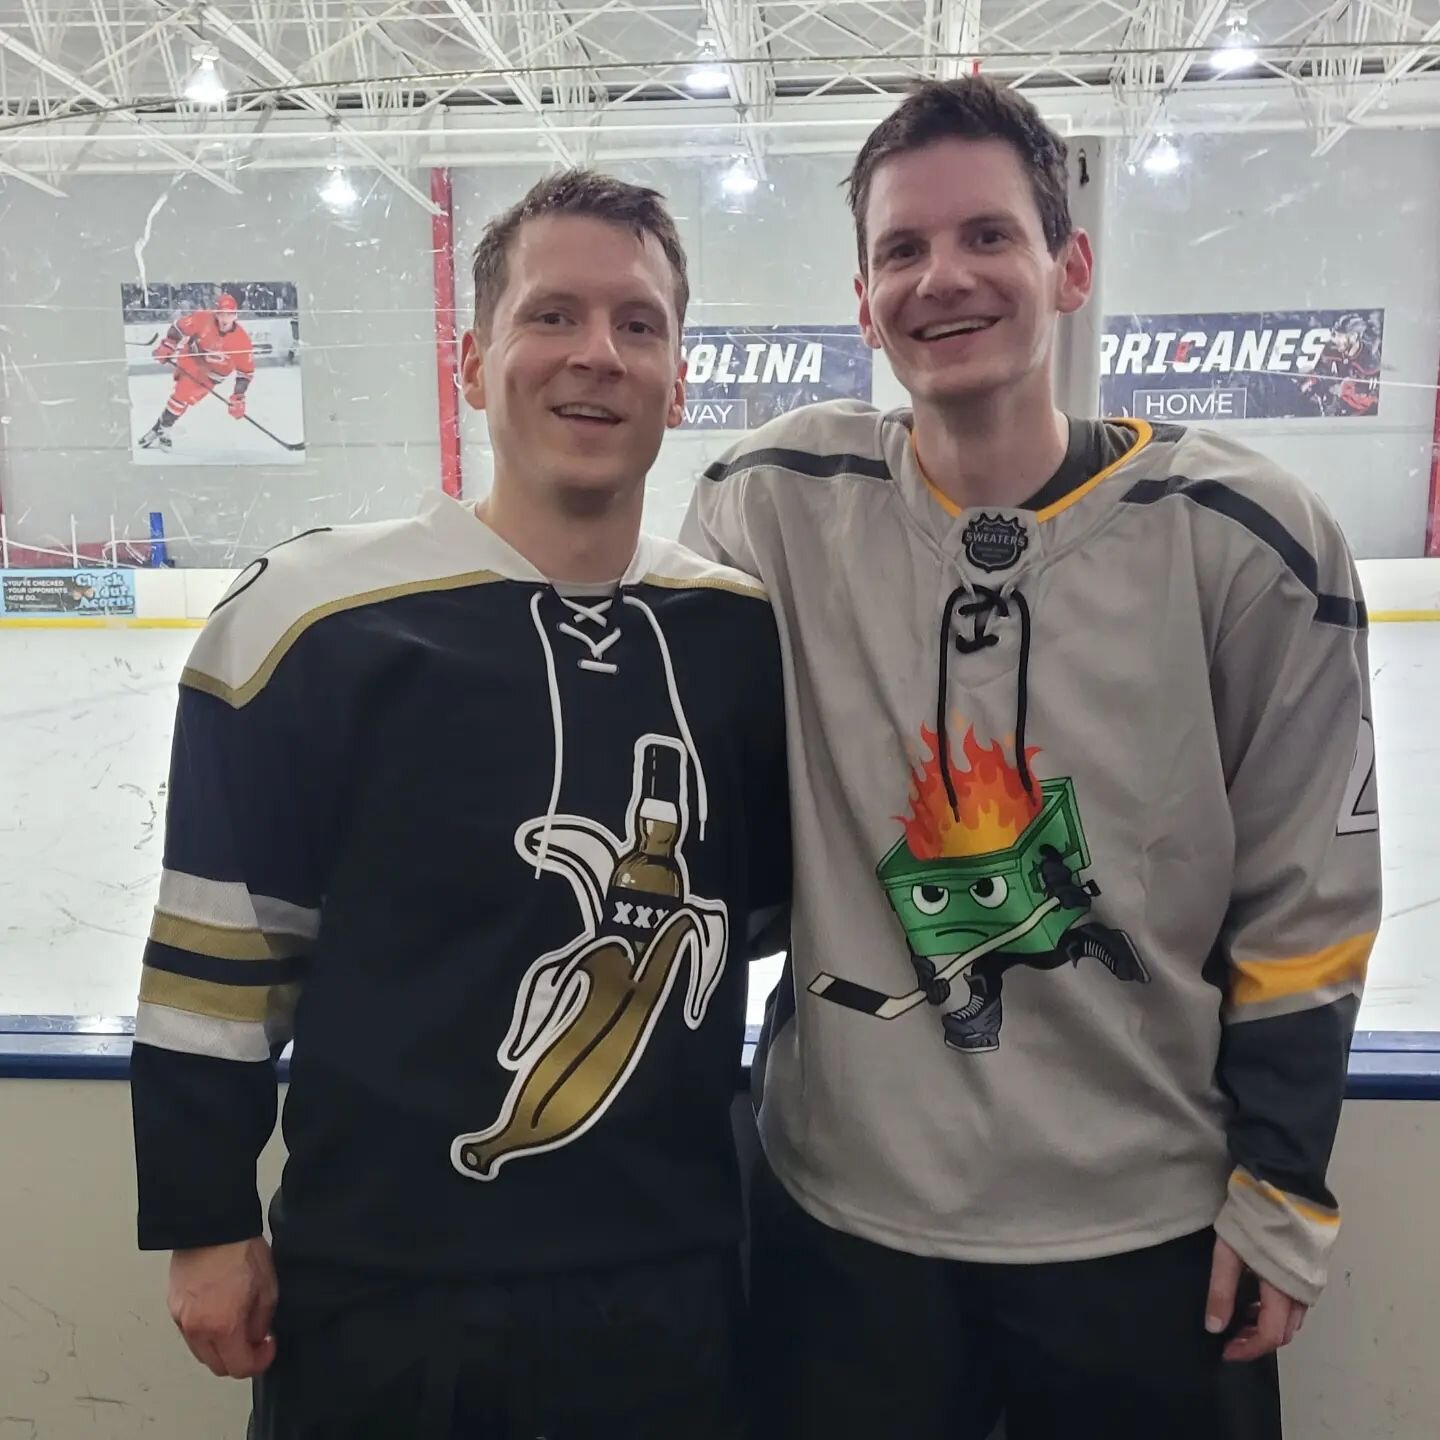 Hopefully our jerseys will match soon

Never too old to learn something new! My brother and I both recently started playing hockey with neither of us having played or skated growing up. So much to learn but having a blast!

If there's something you'v